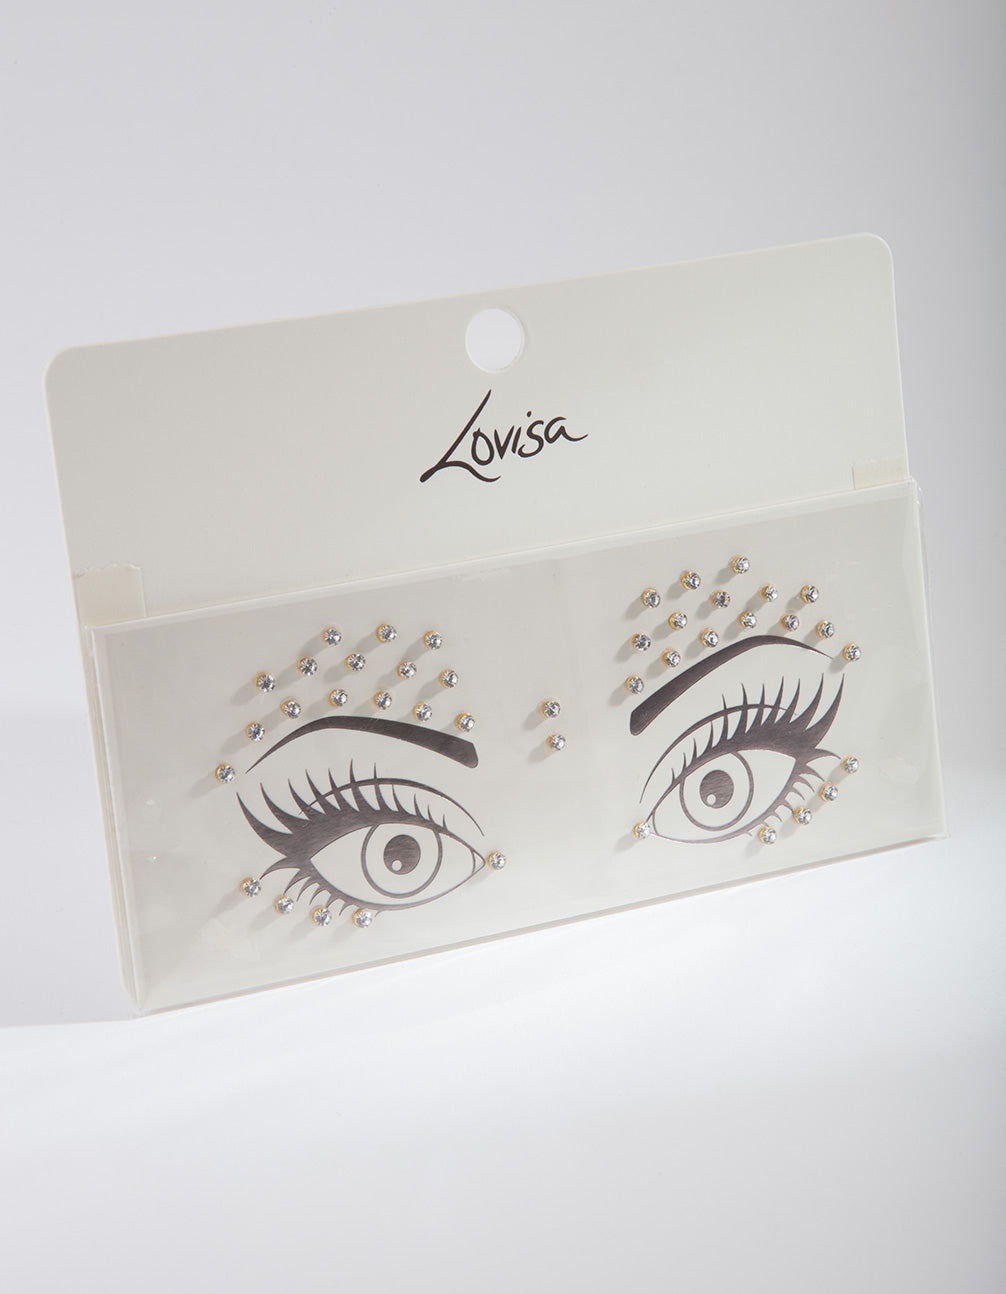 Lovisa - NEW IN. Face masks available online in Australia and New